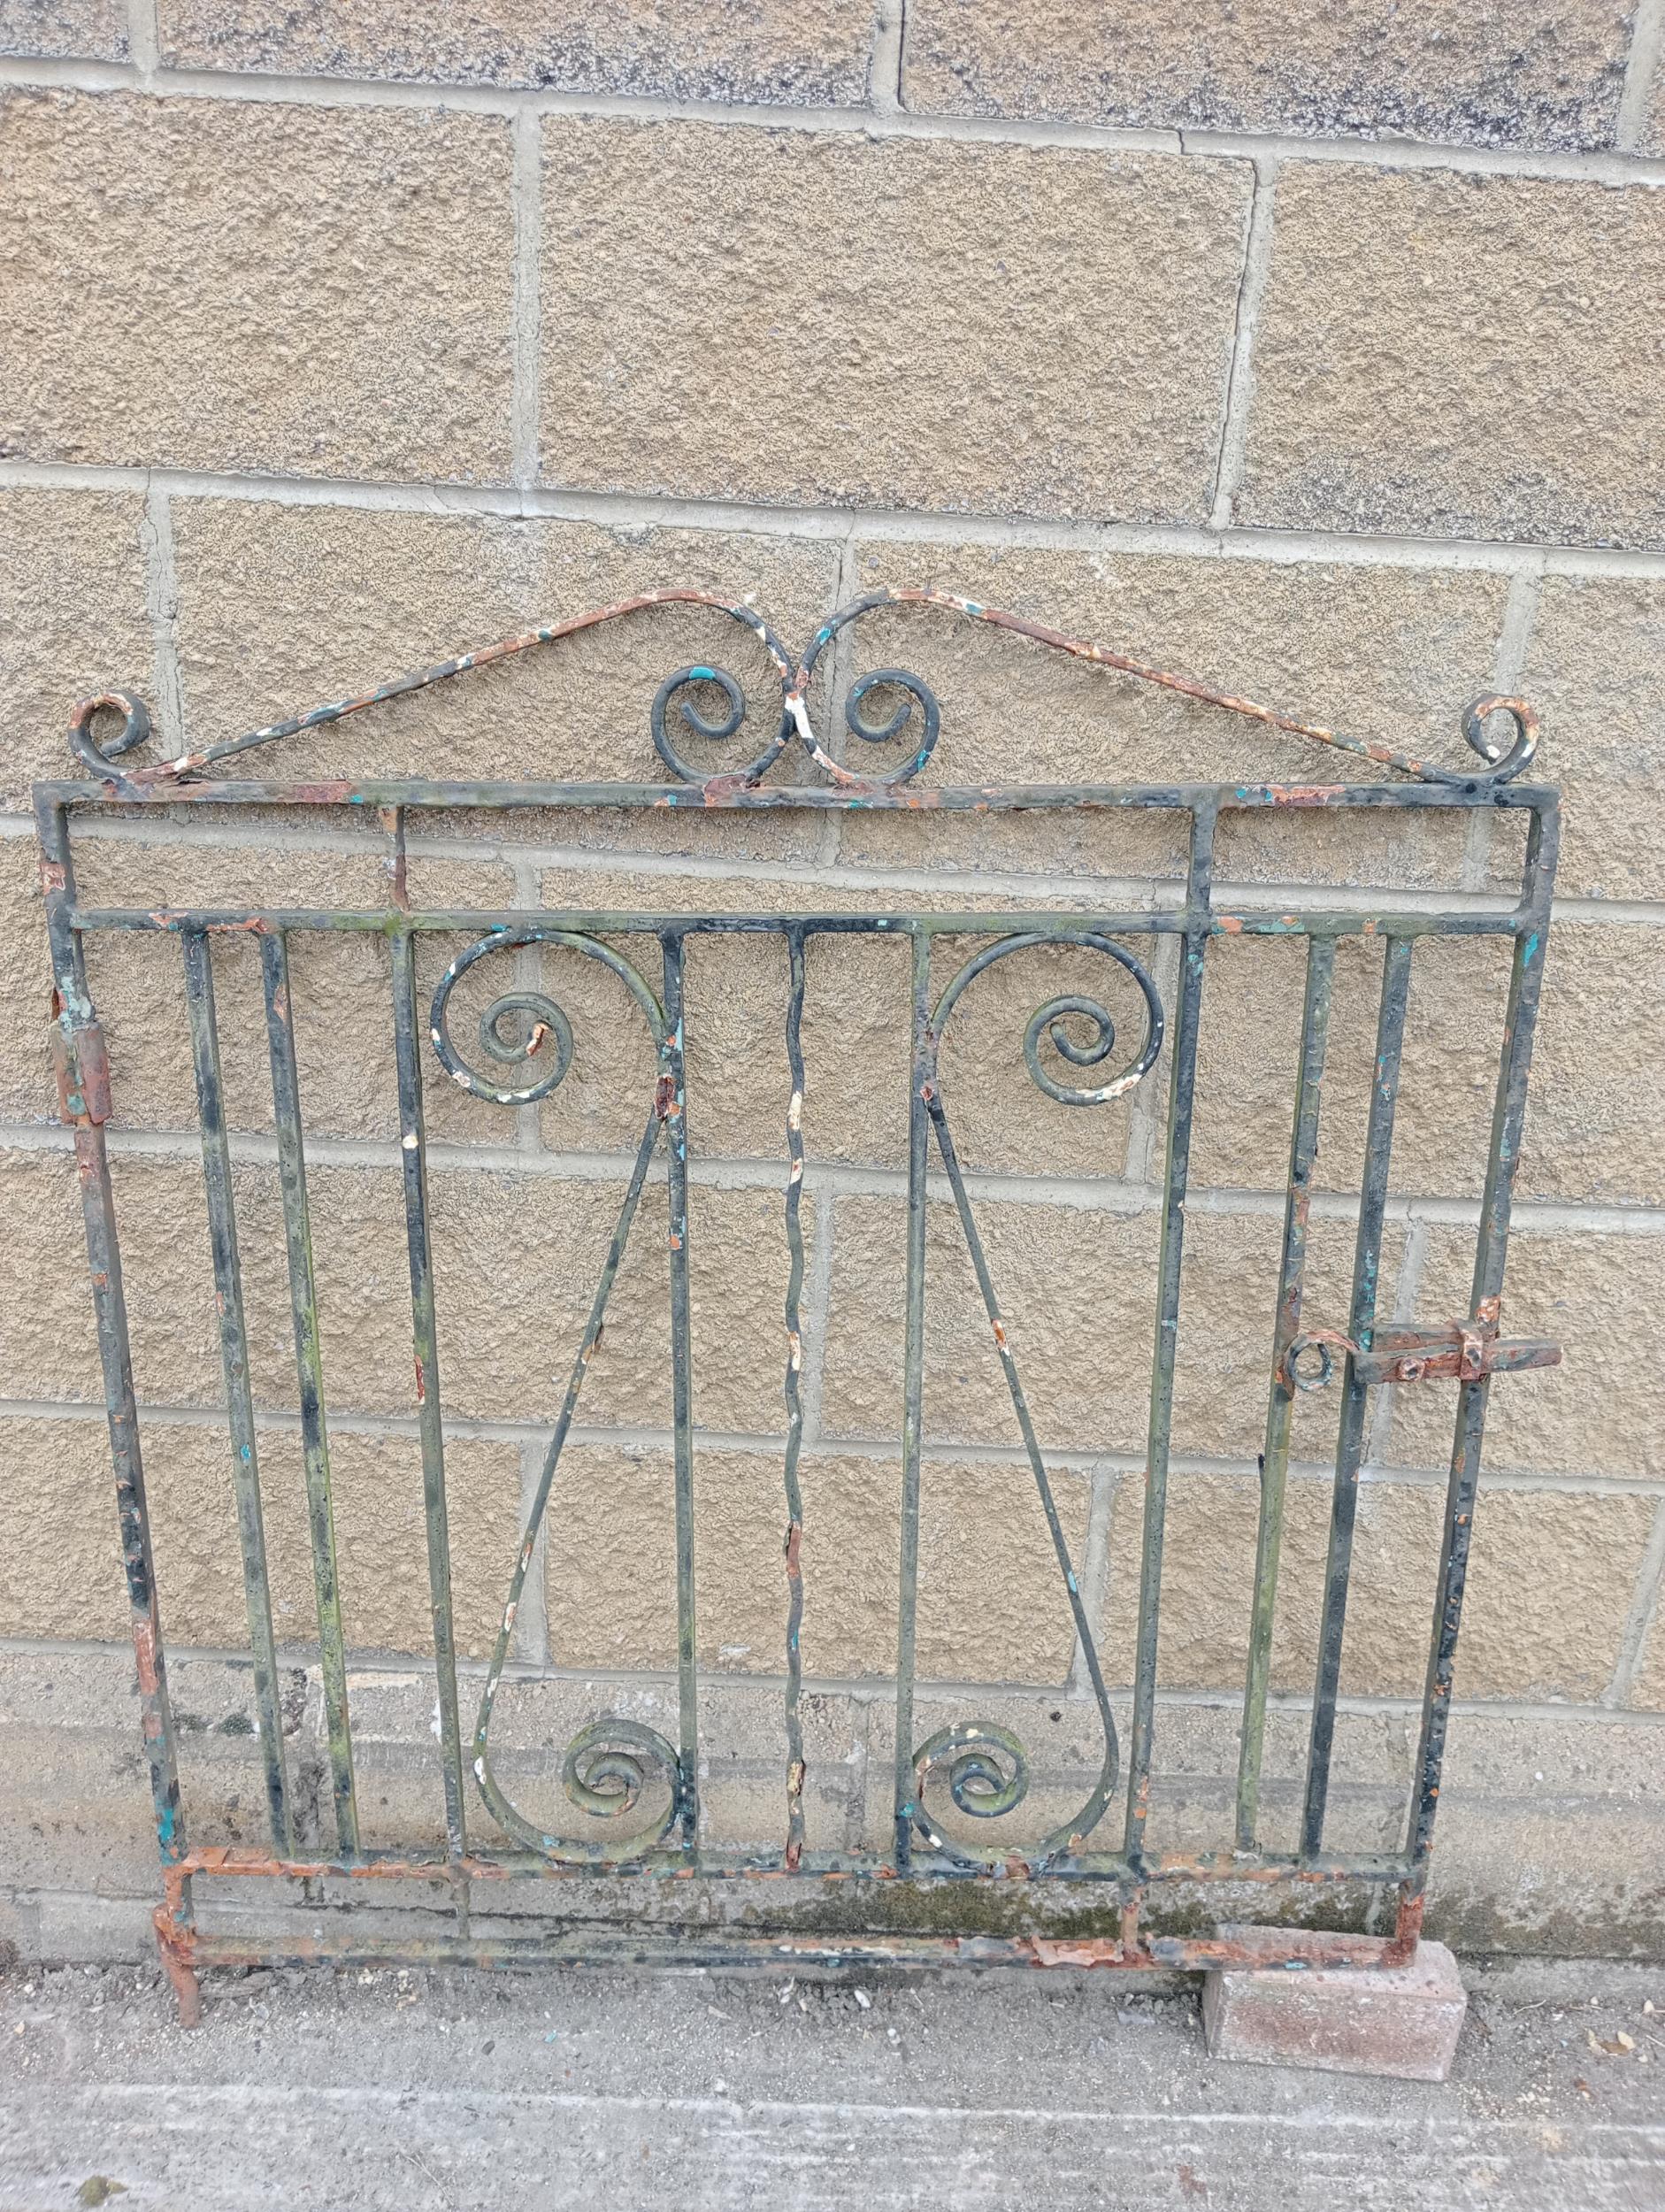 Wrought iron garden gate with scroll design {H 110cm x W 102}. (NOT AVAILABLE TO VIEW IN PERSON) - Image 3 of 4